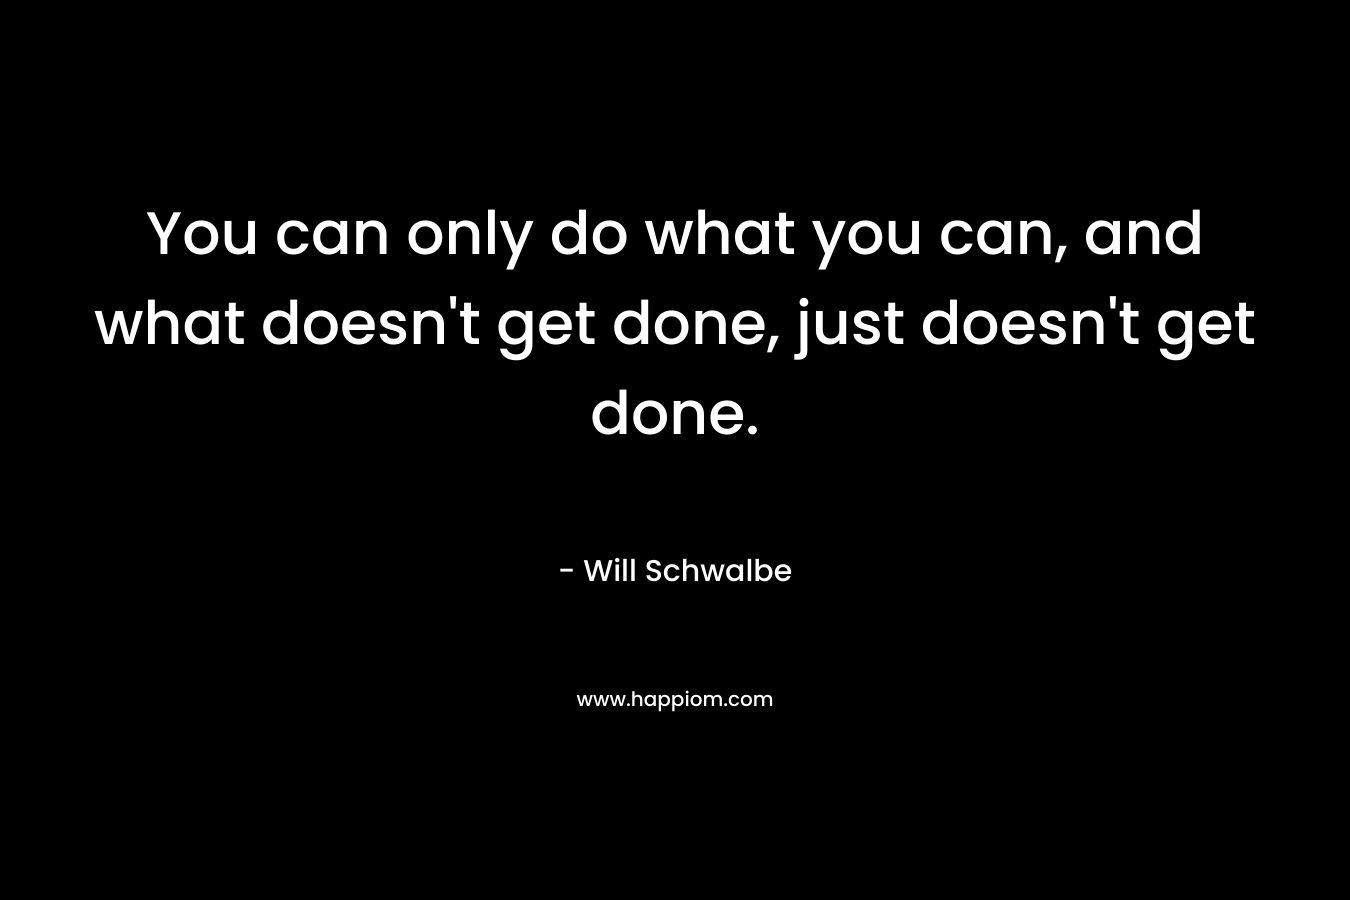 You can only do what you can, and what doesn’t get done, just doesn’t get done. – Will Schwalbe